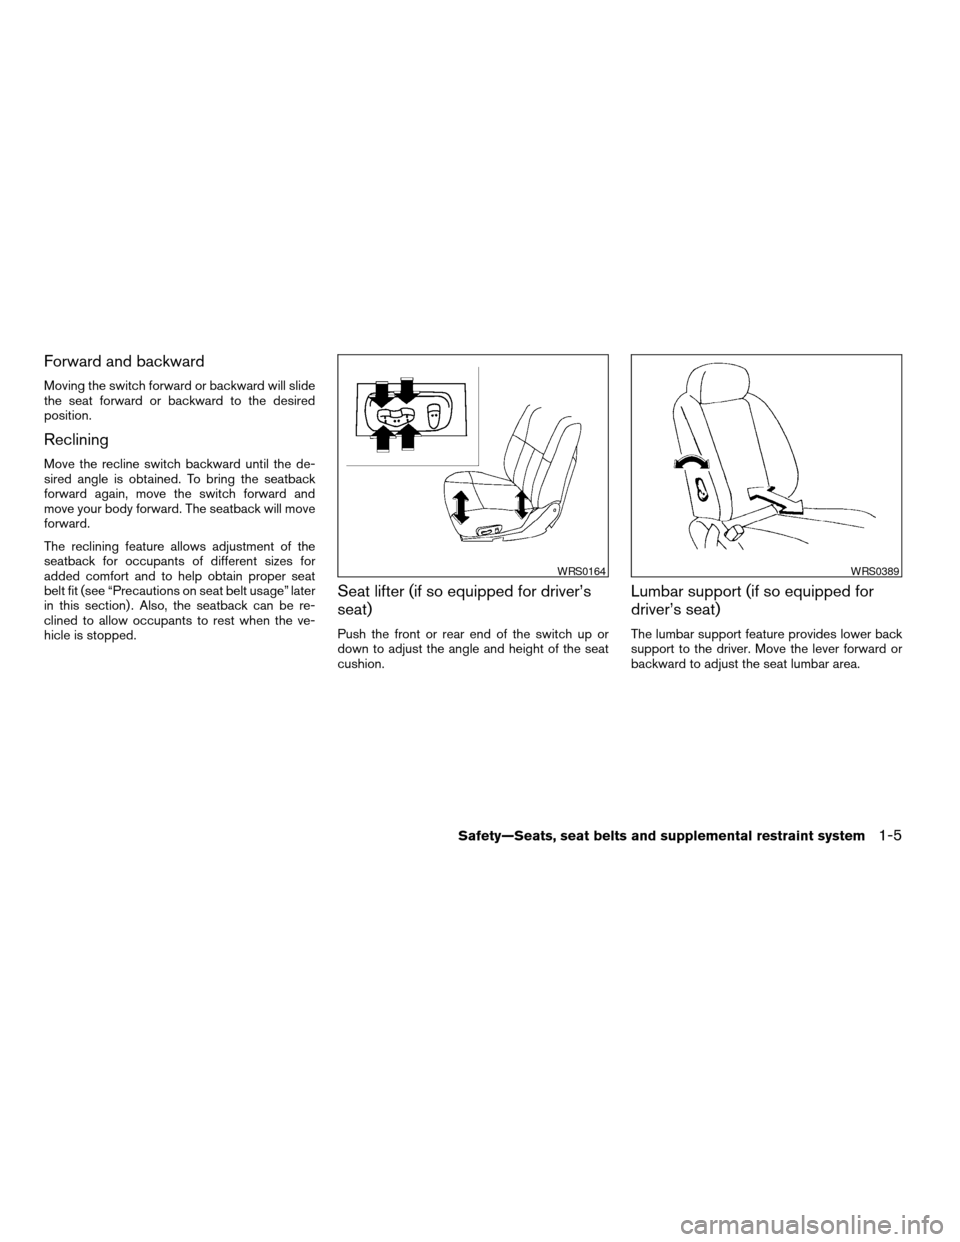 NISSAN ALTIMA 2005 L31 / 3.G Owners Manual Forward and backward
Moving the switch forward or backward will slide
the seat forward or backward to the desired
position.
Reclining
Move the recline switch backward until the de-
sired angle is obta